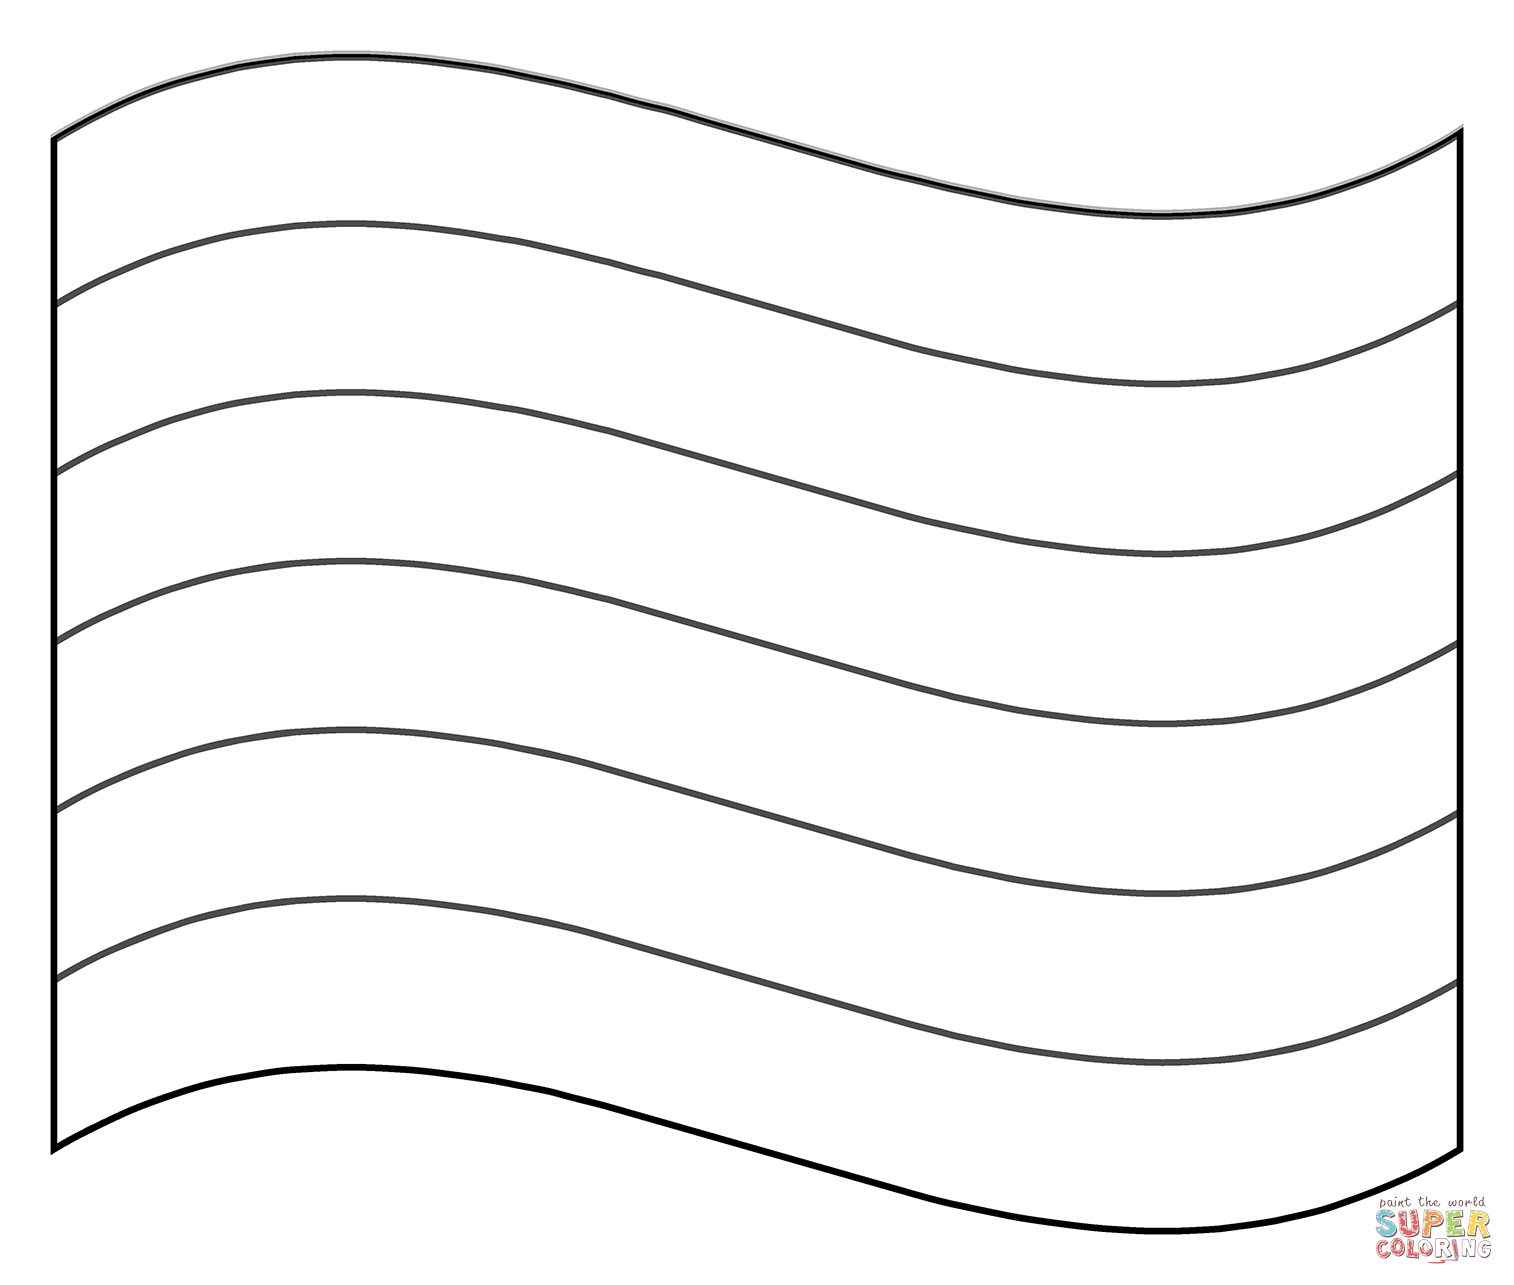 Rainbow flag emoji coloring page free printable coloring pages